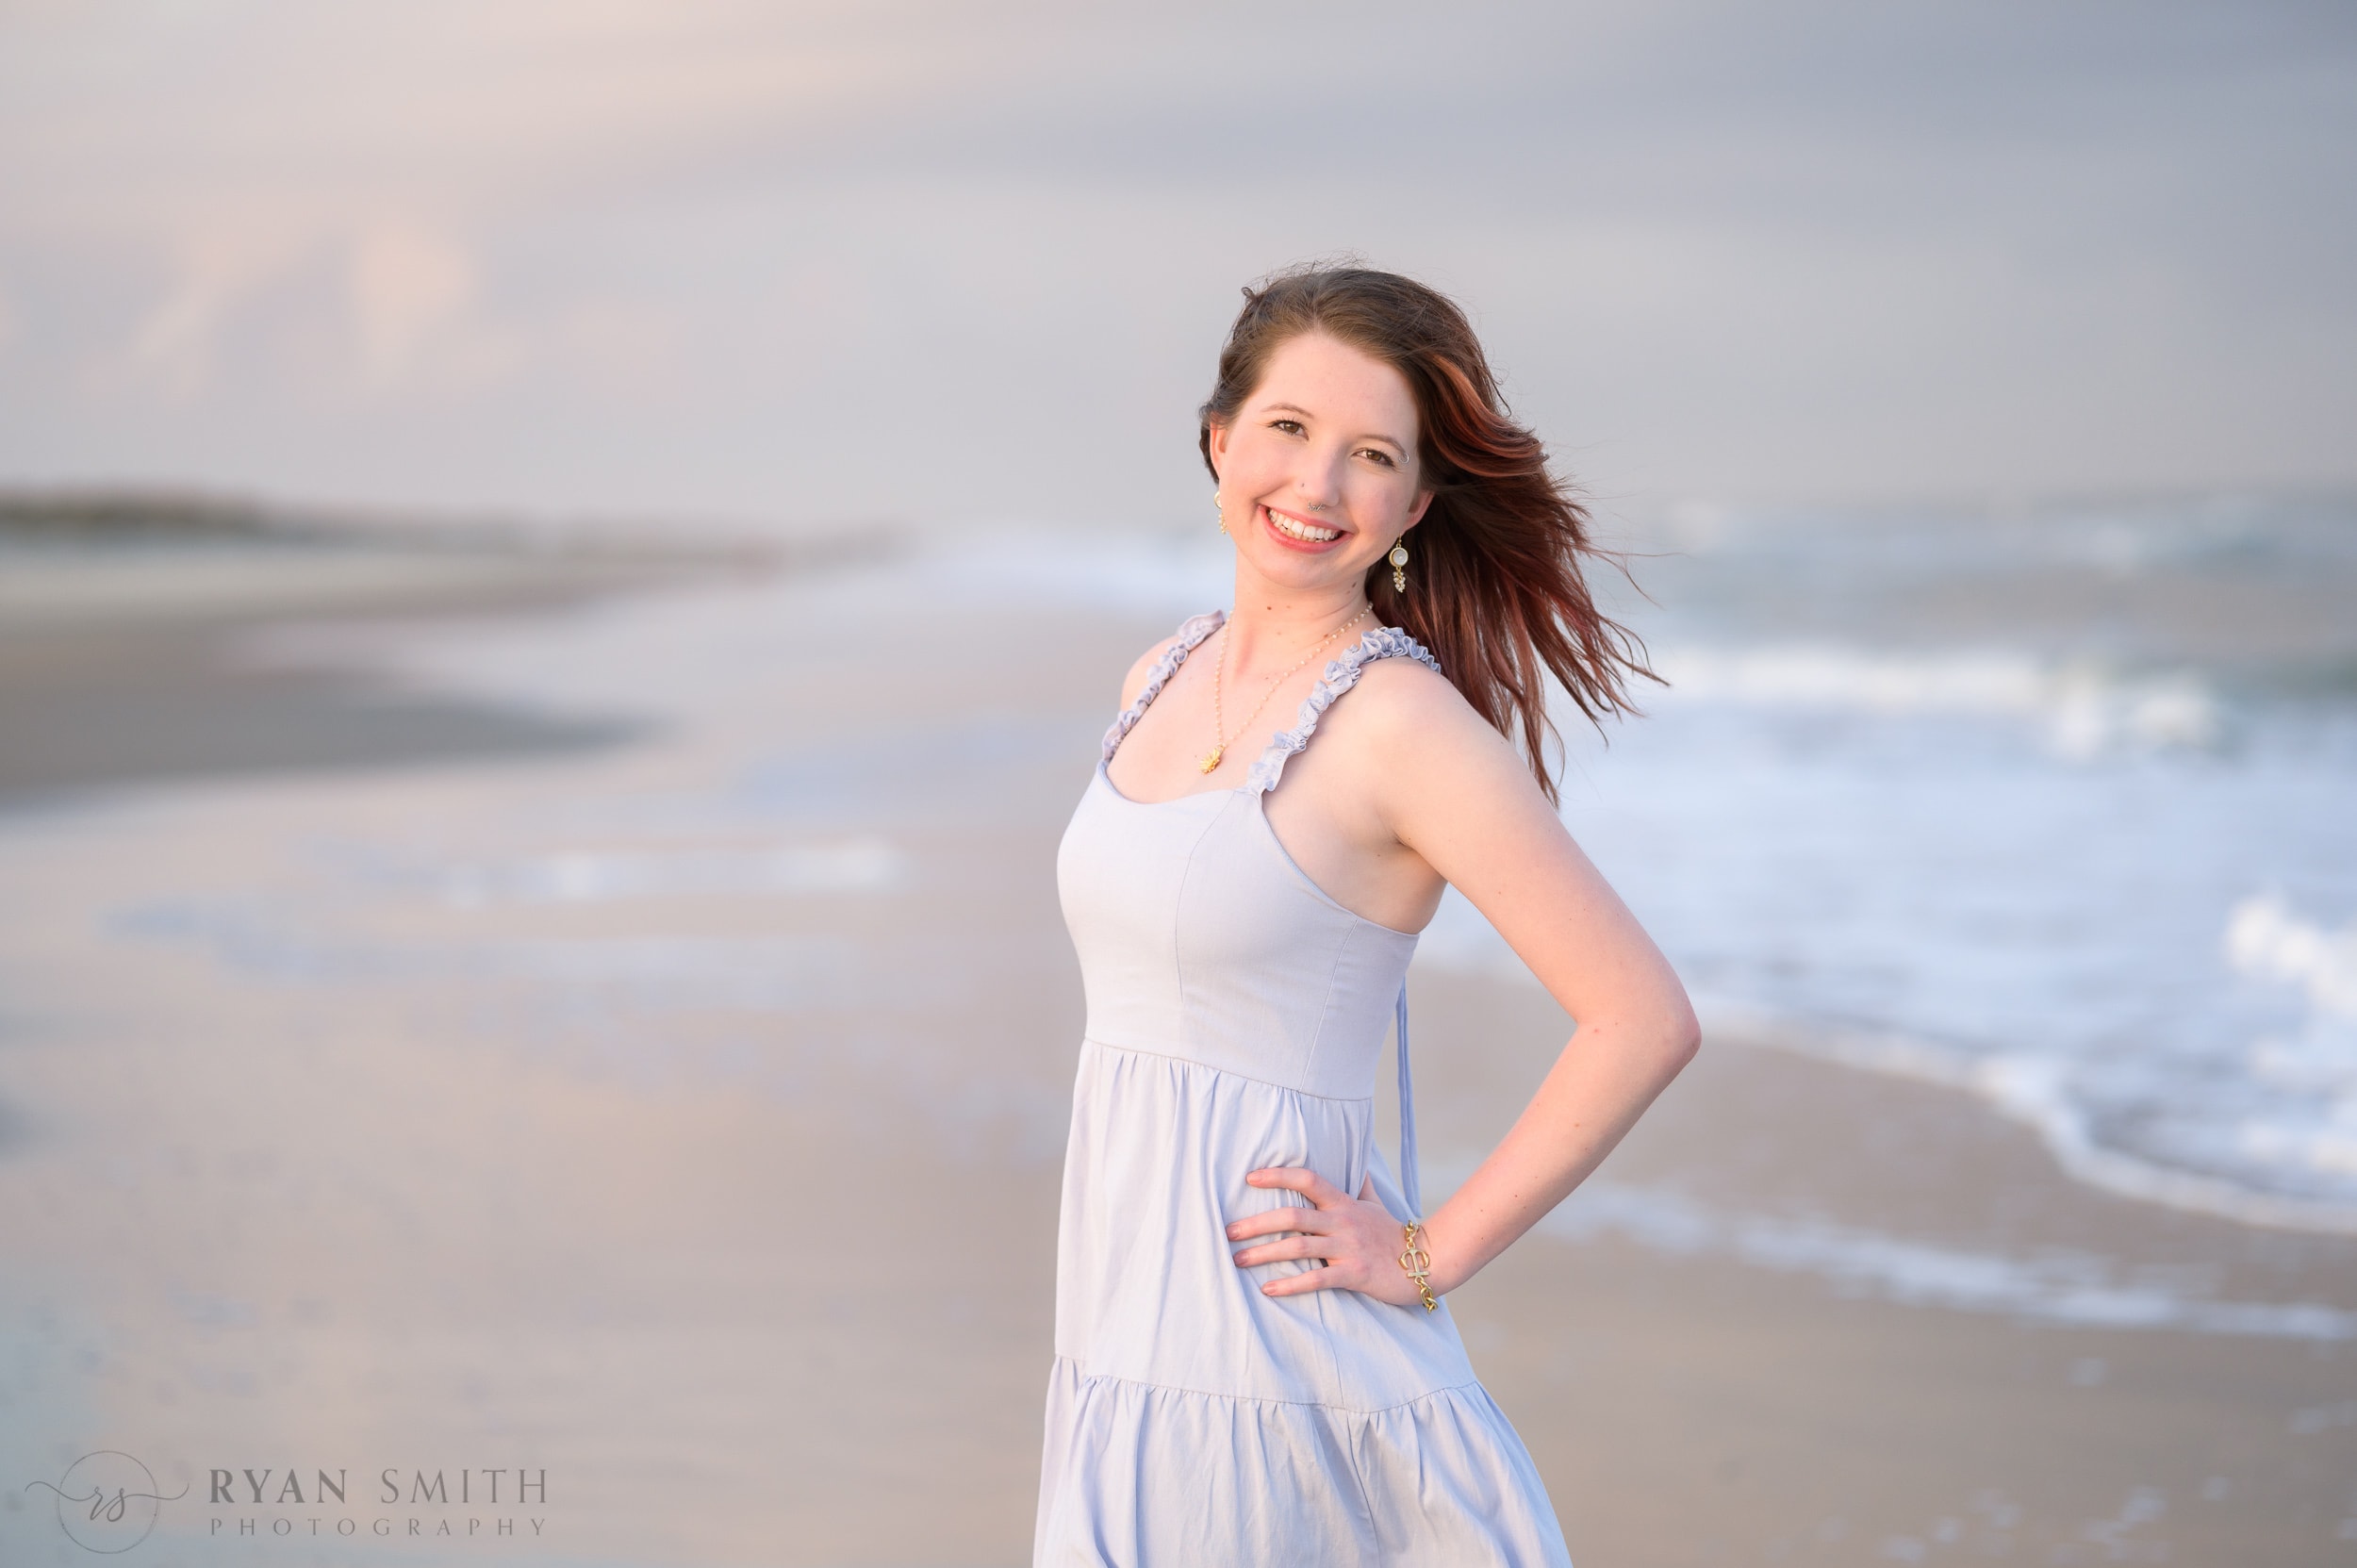 Pose by the ocean - Pawleys Island